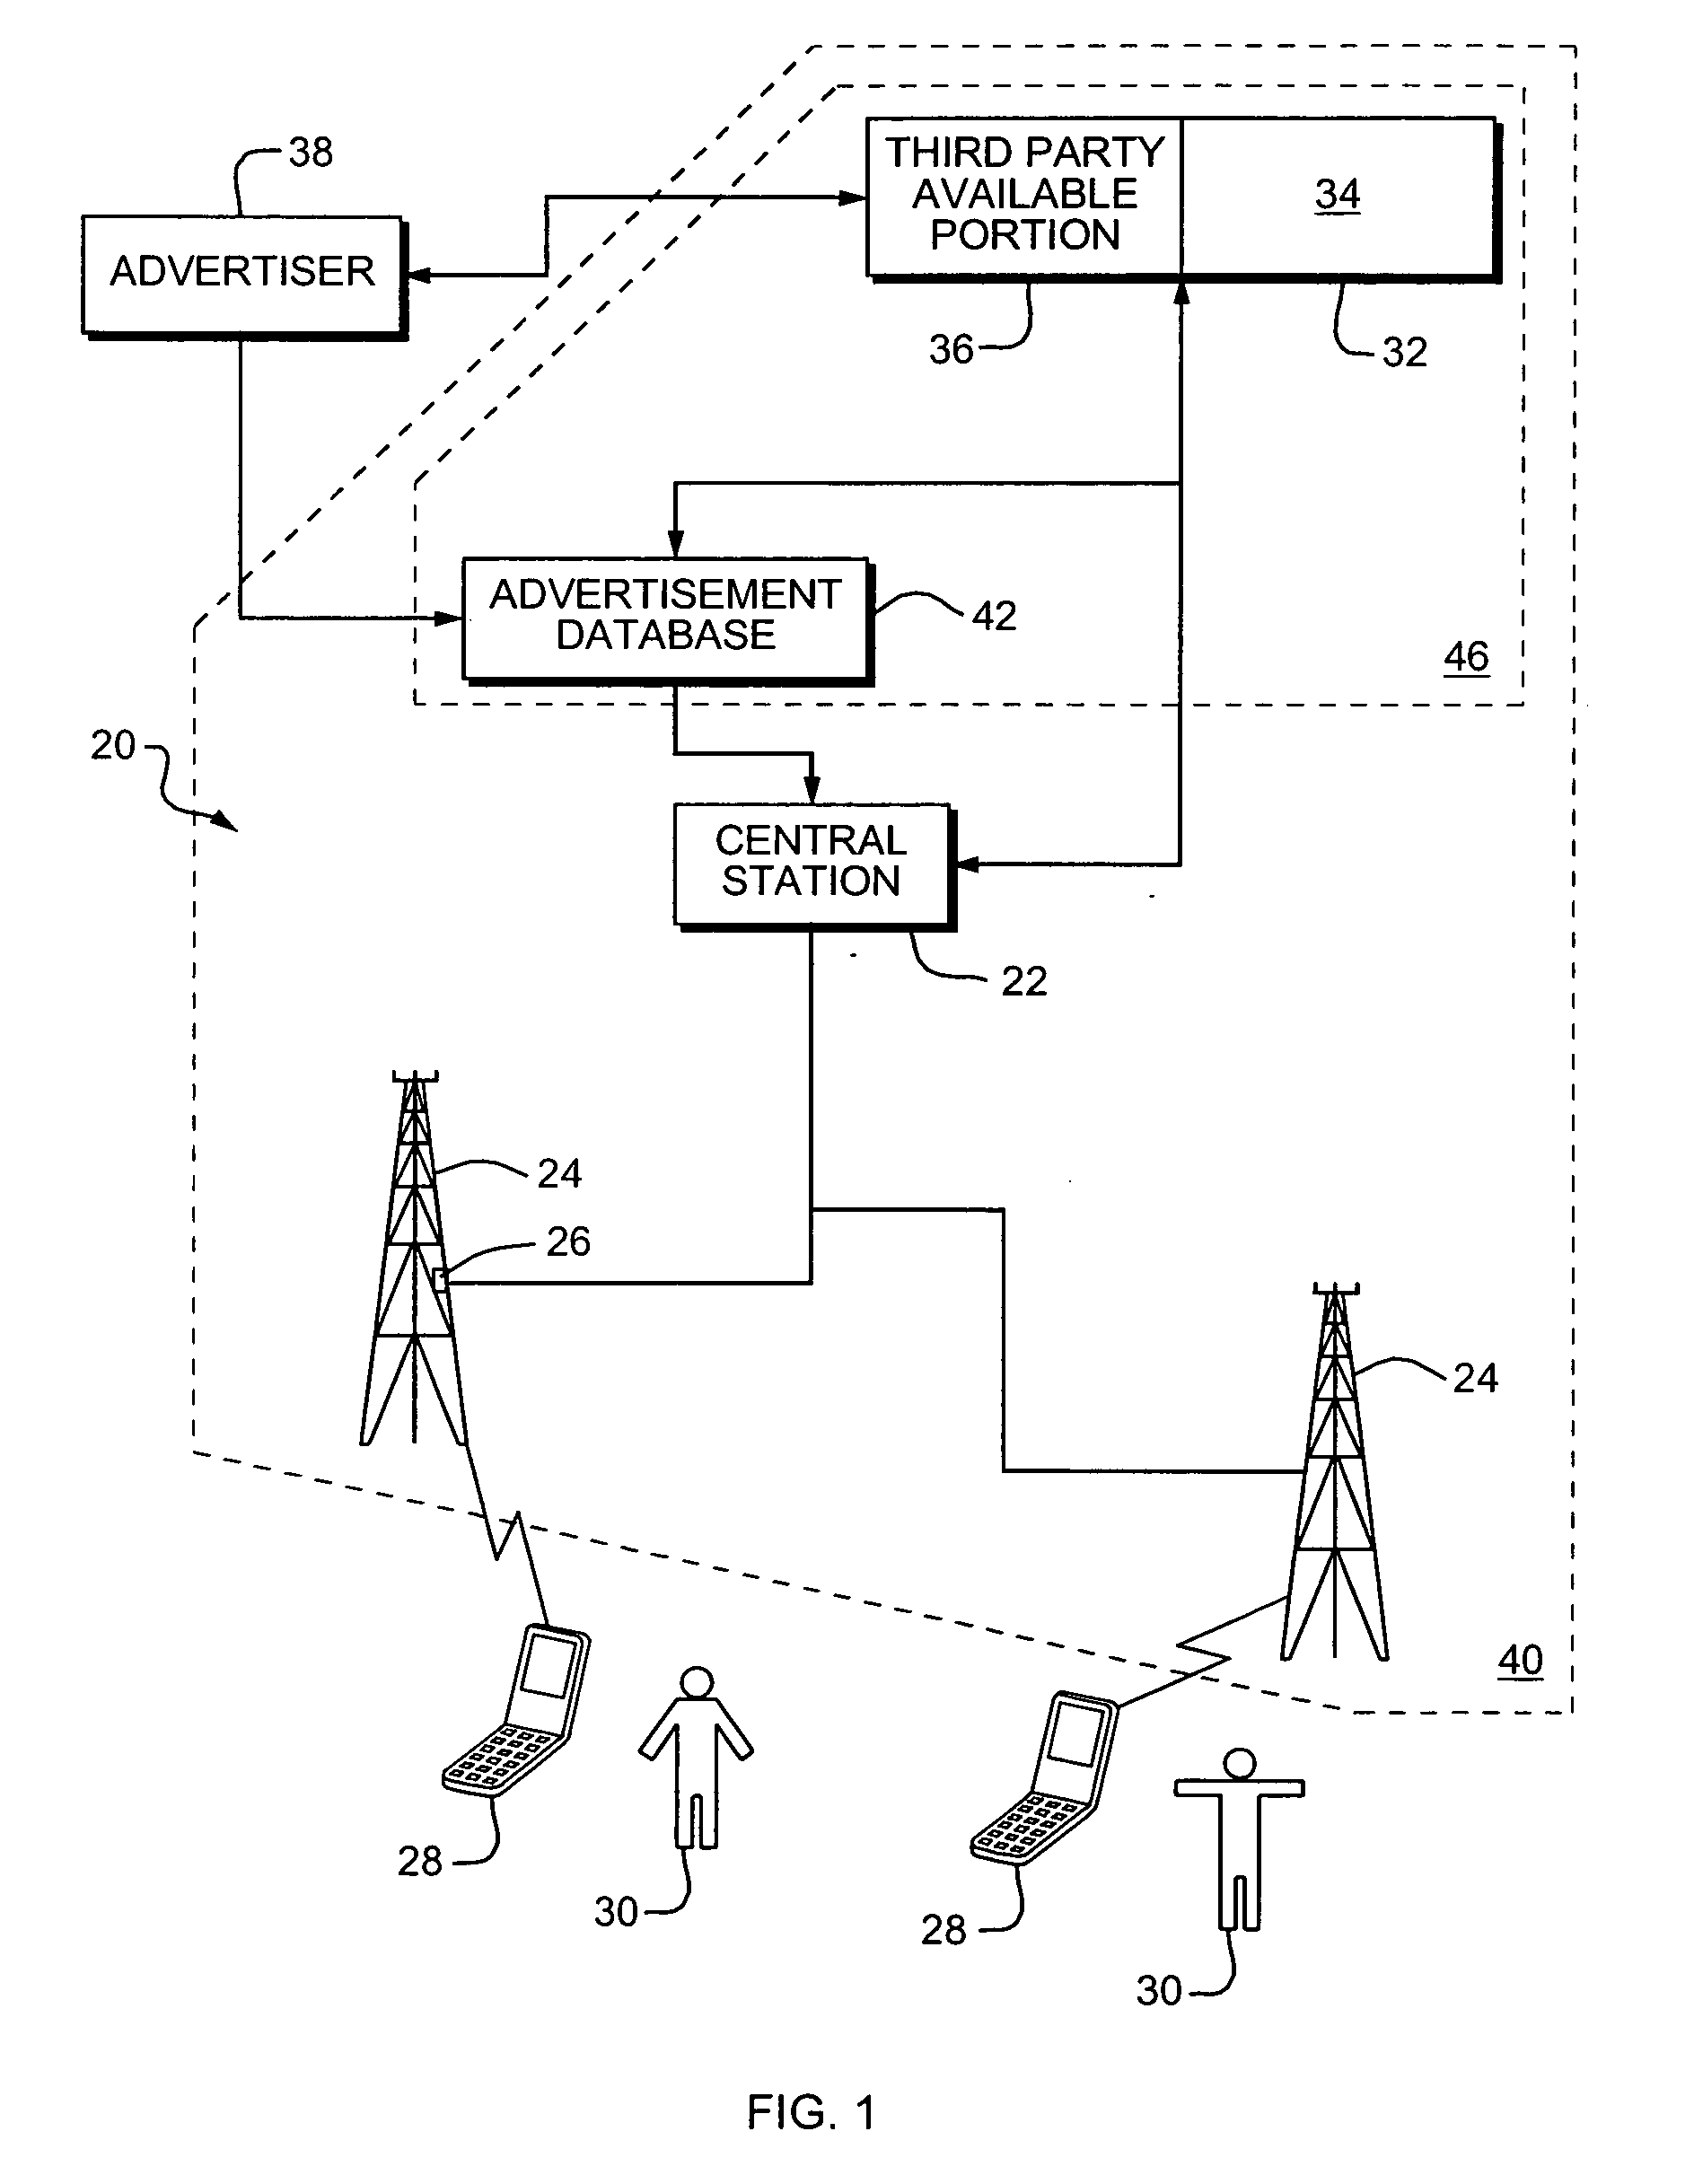 System for delivering advertisements to wireless communication devices